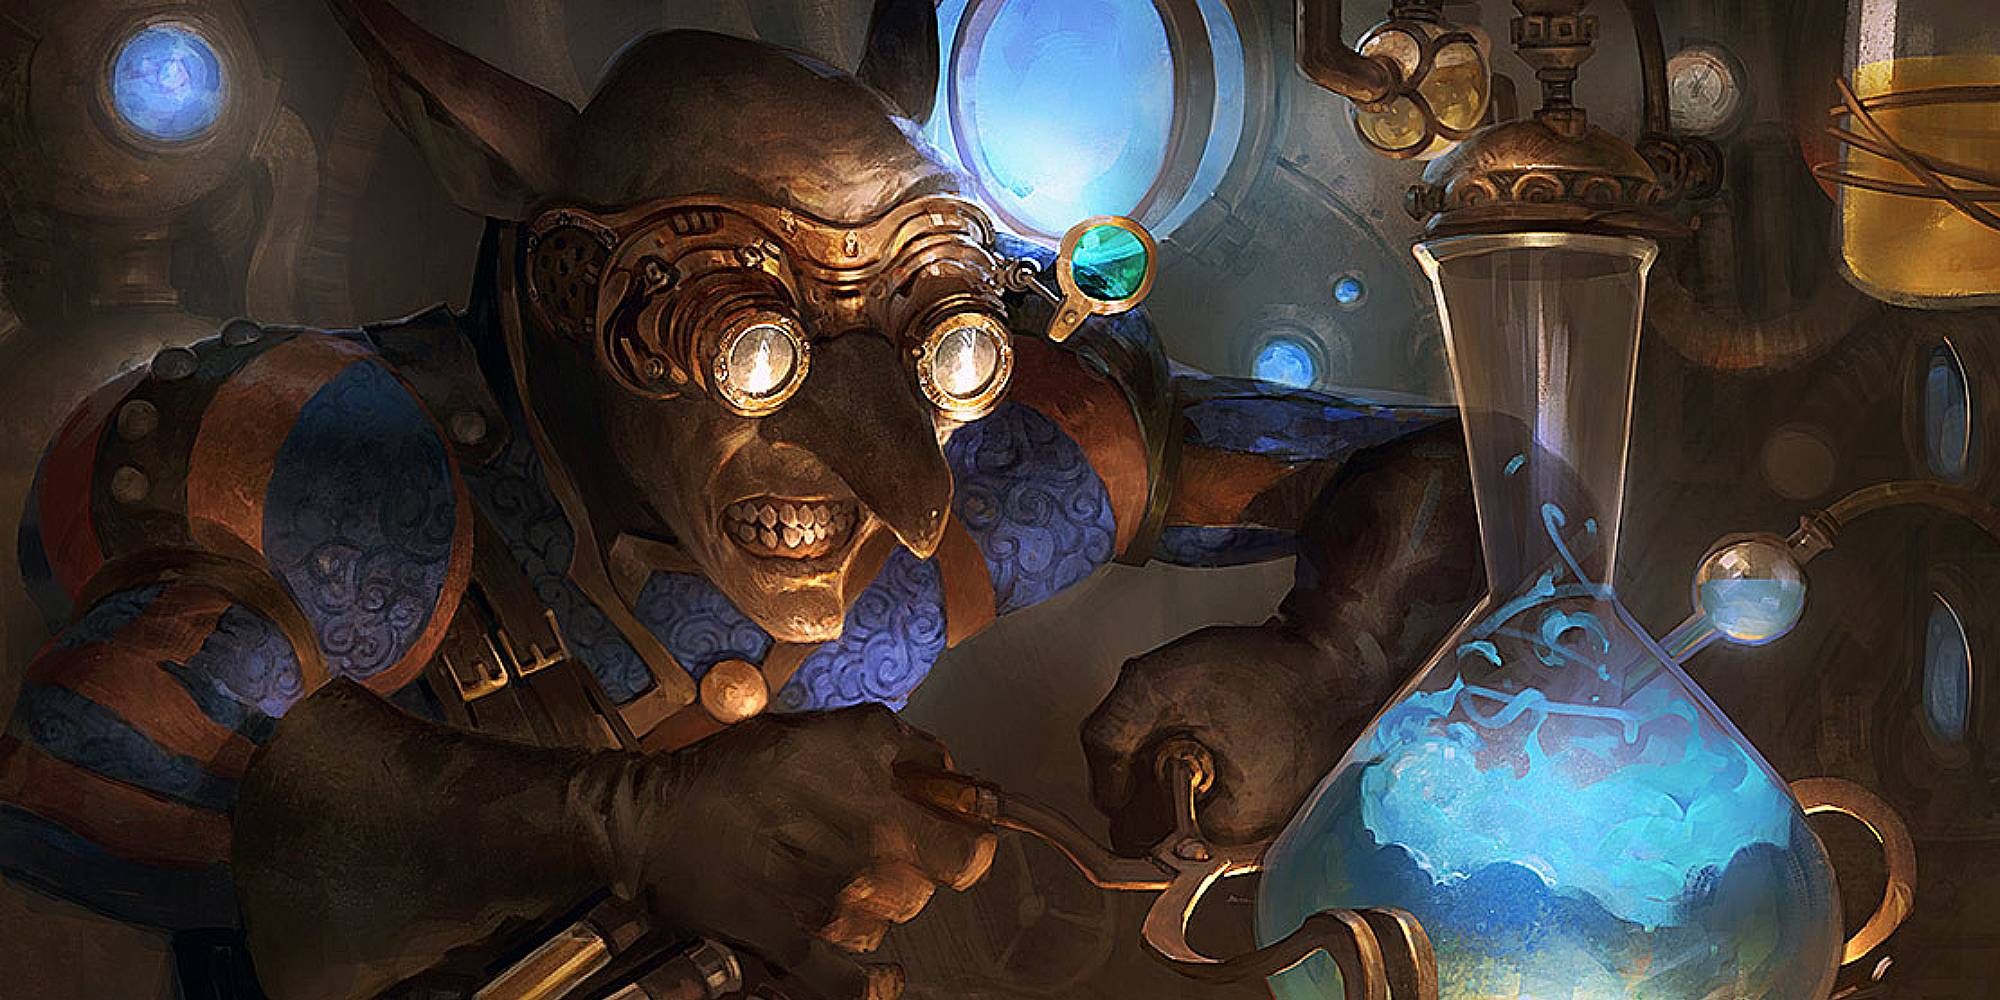 A goblin in goggles uses pincers to hold a glowing blue liquid in a vial